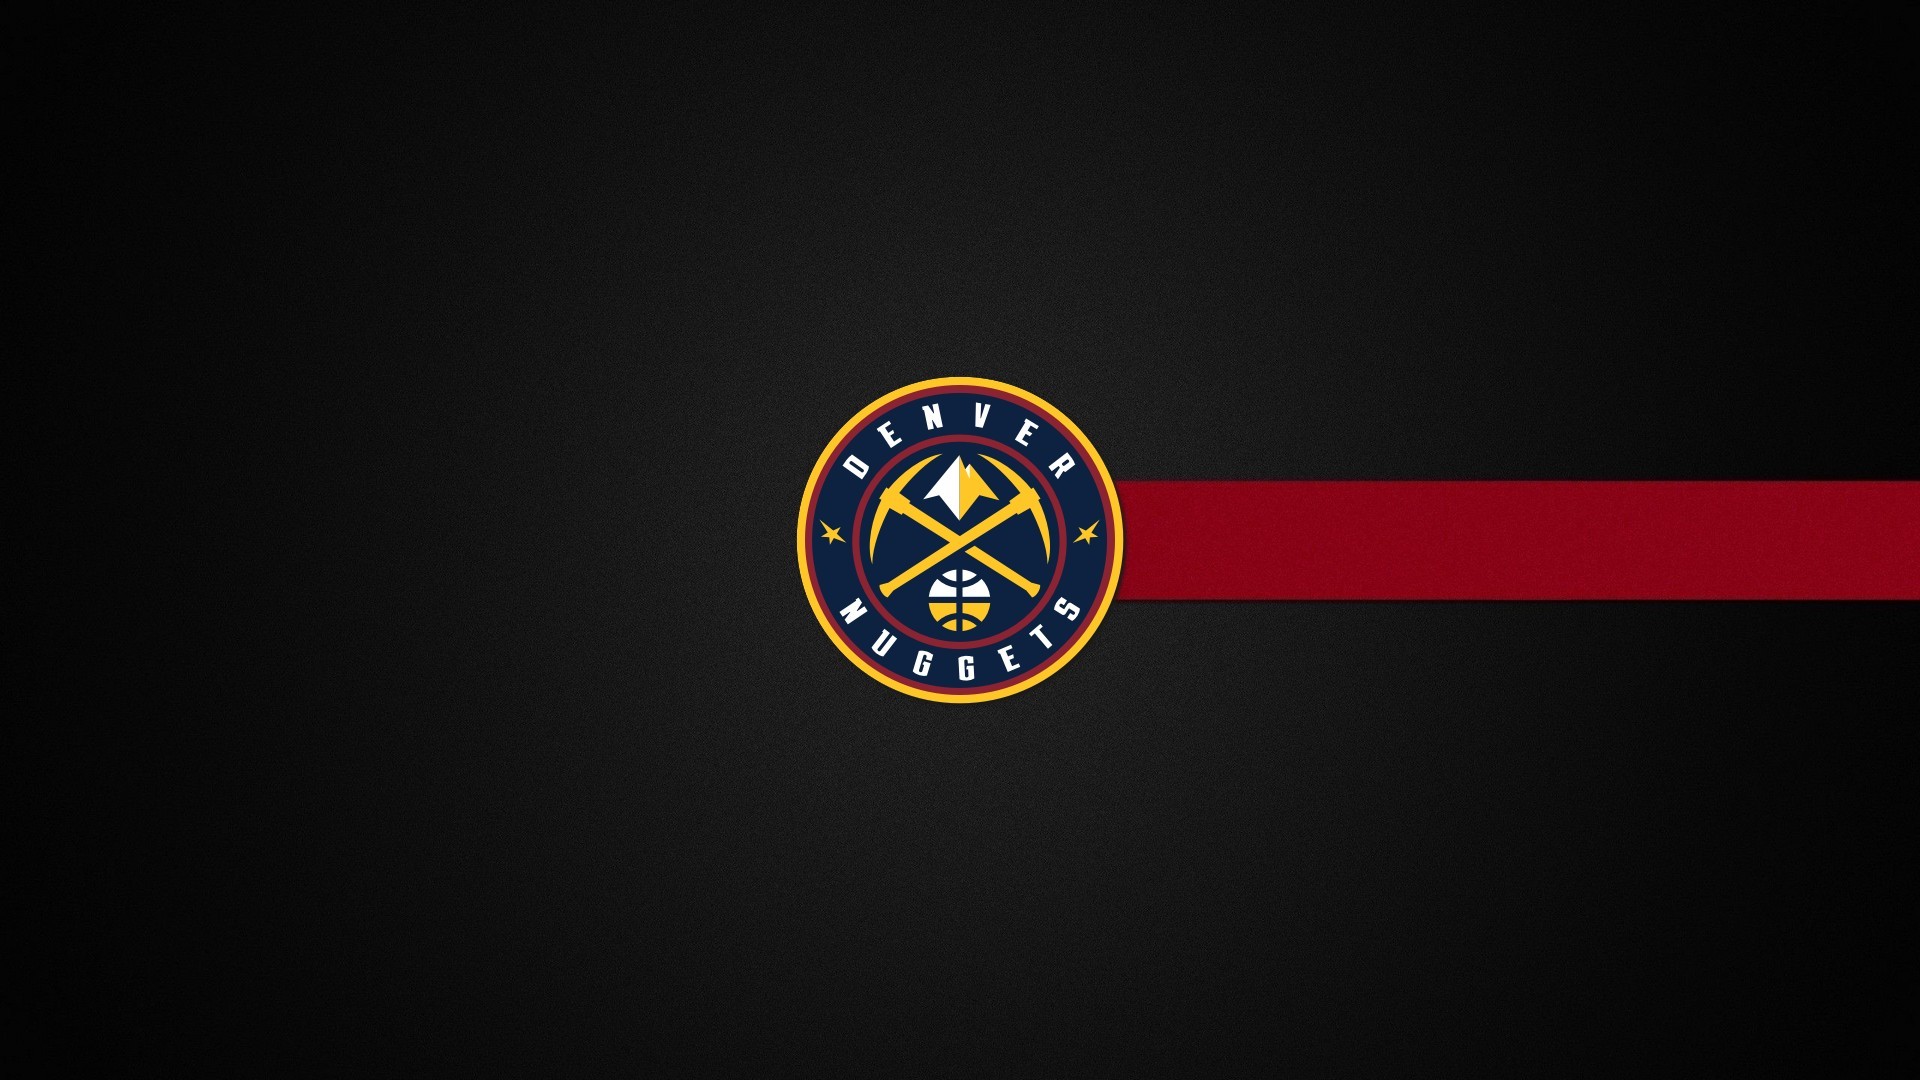 Wallpapers HD Denver Nuggets with high-resolution 1920x1080 pixel. You can use this wallpaper for your Desktop Computer Backgrounds, Windows or Mac Screensavers, iPhone Lock screen, Tablet or Android and another Mobile Phone device